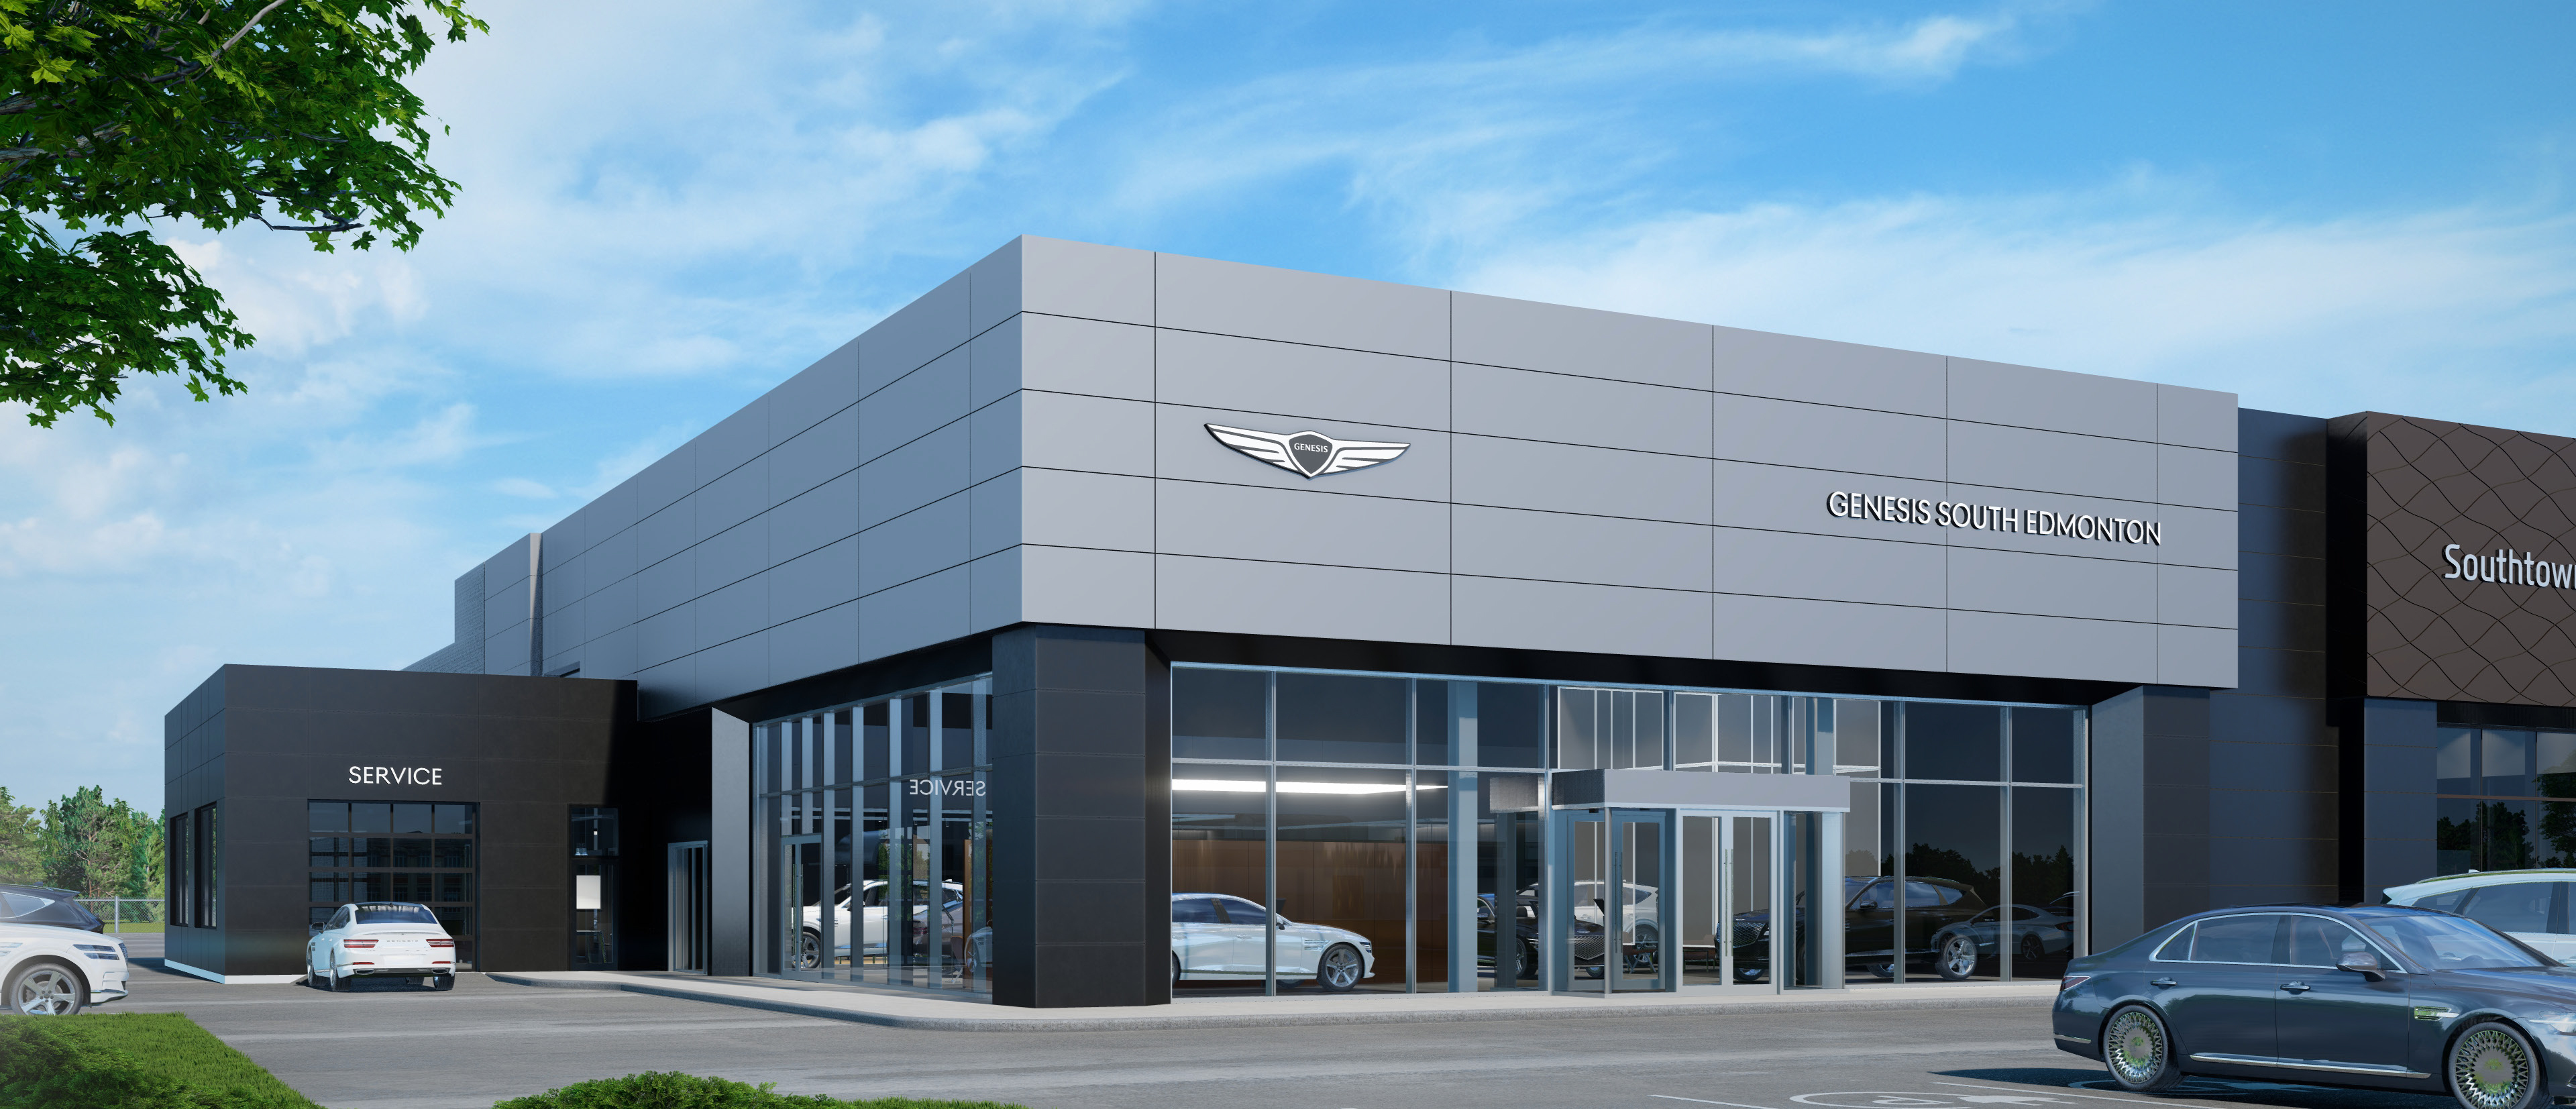 Photo of the outside of the Genesis South Edmonton dealership